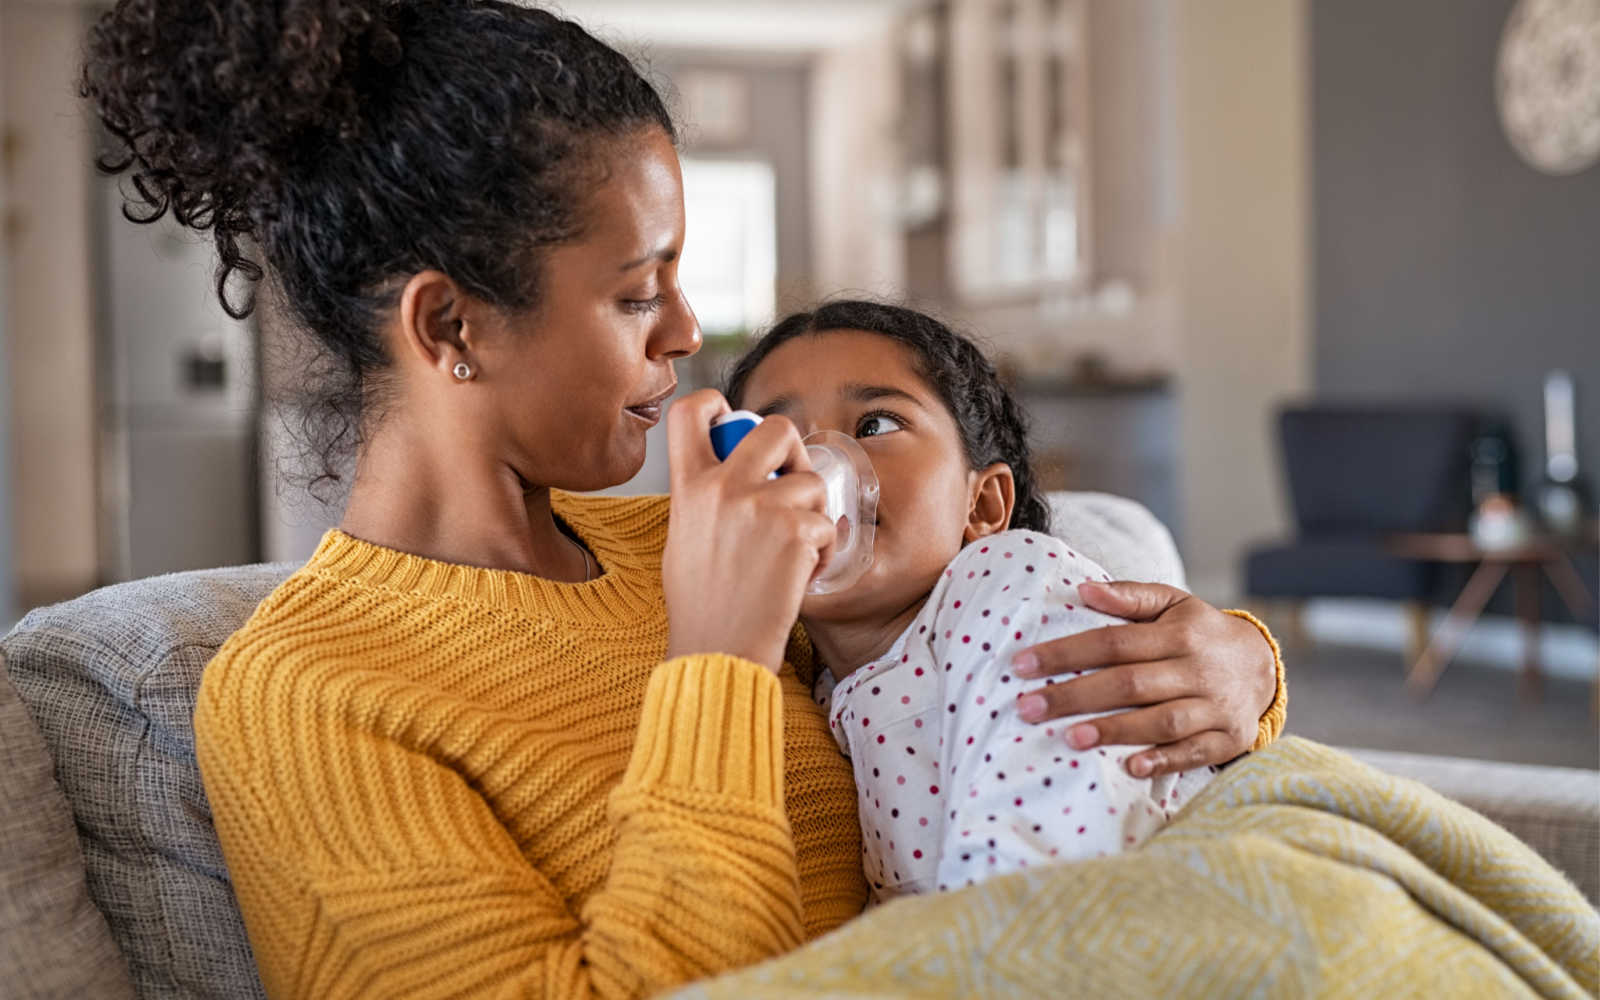 Woman Caring For Her Child with Asthma Inhaler